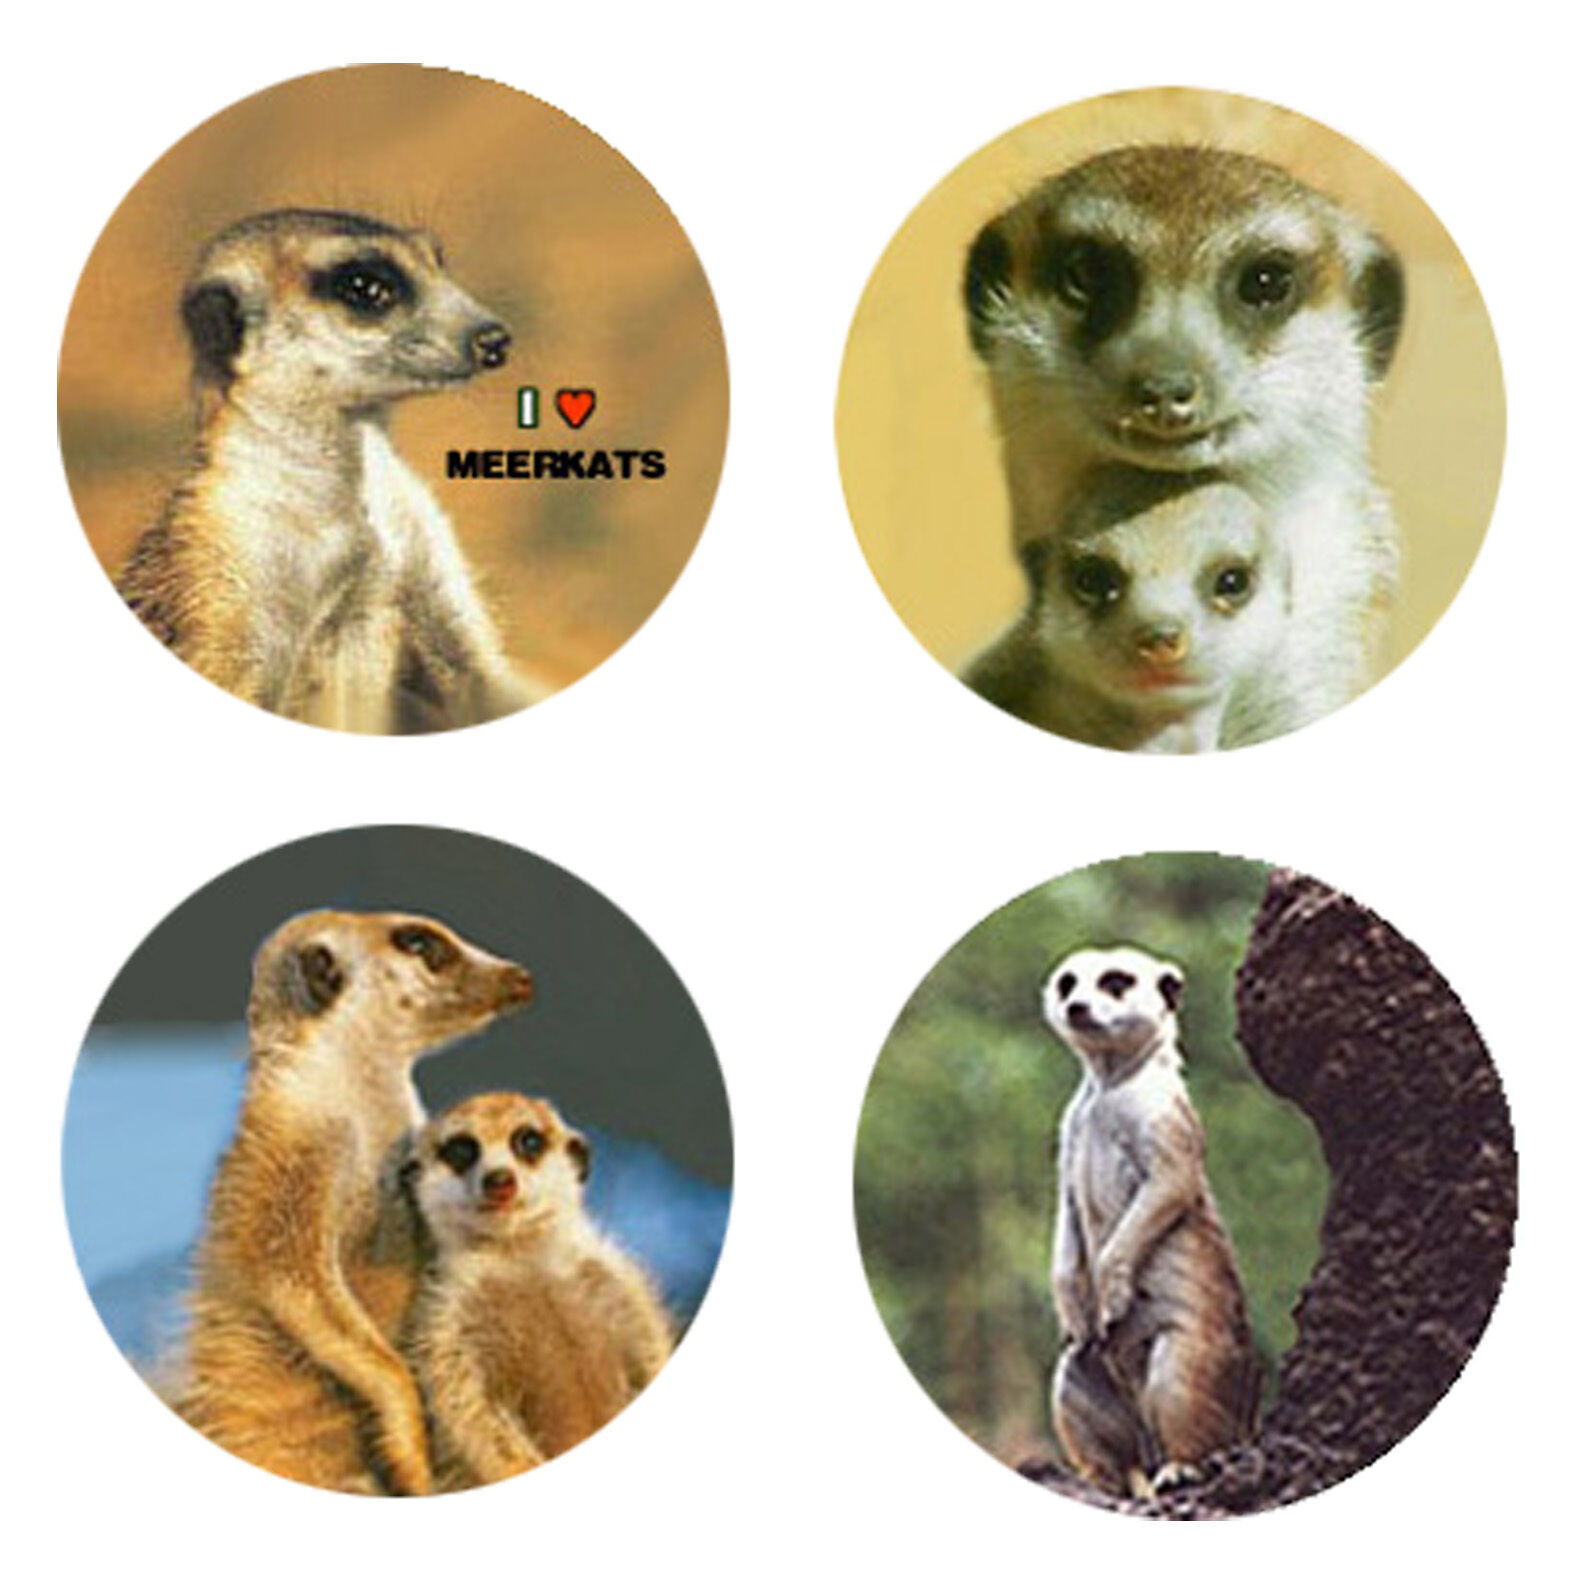 Meerkat Magnets-B:   4 Cool Meerkats for your Fridge or Collection-A Great Gift